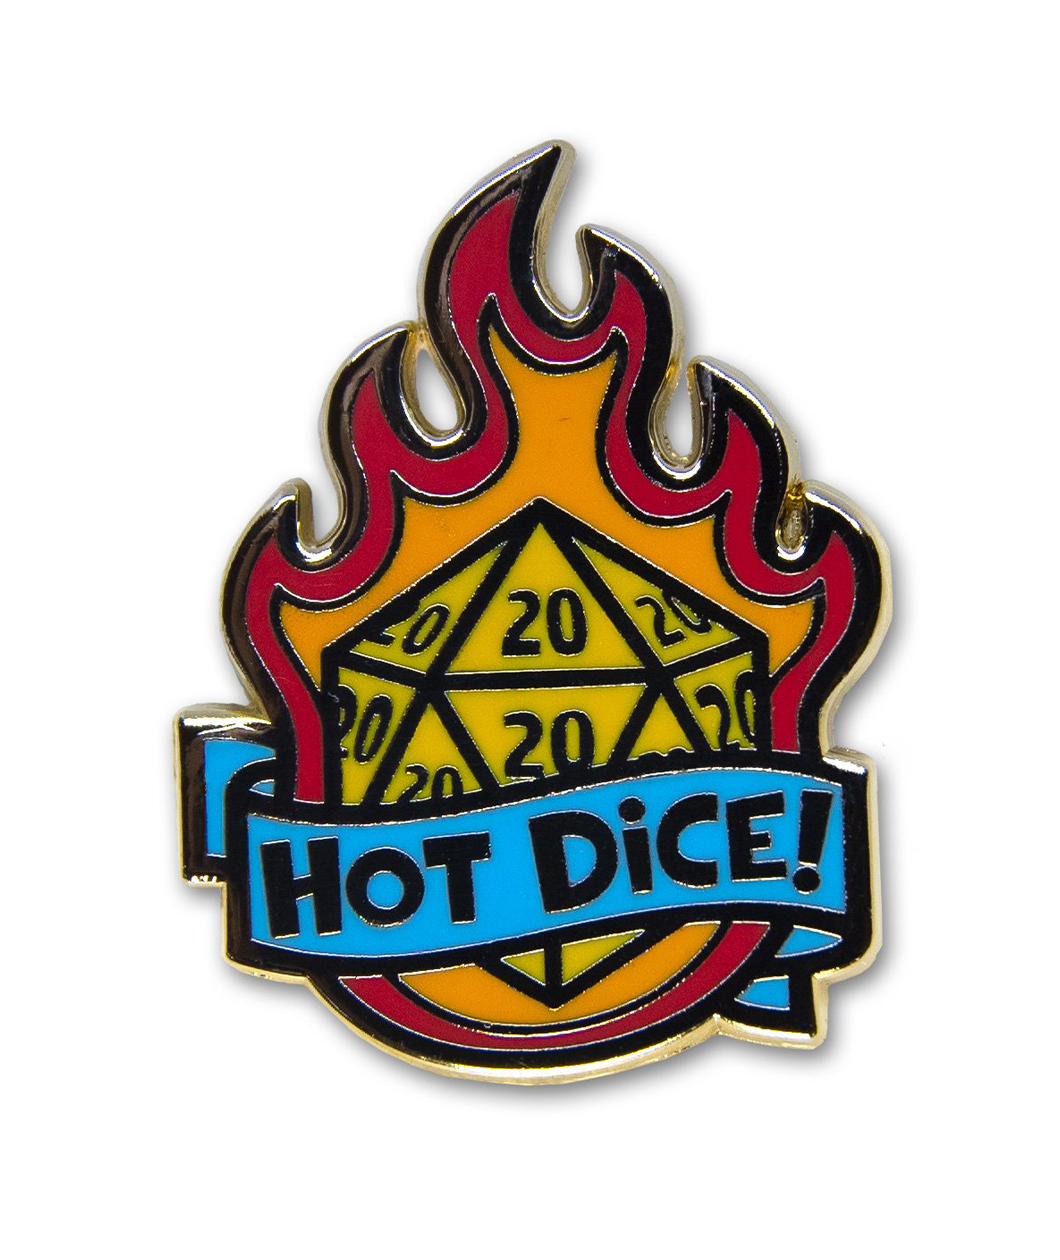 Gold plated enamel pin with a yellow D20 in the middle that has a 20 on every face. It is on fire and then there is a blue ribbon illustrated on the front that says HOT DICE! in gold.